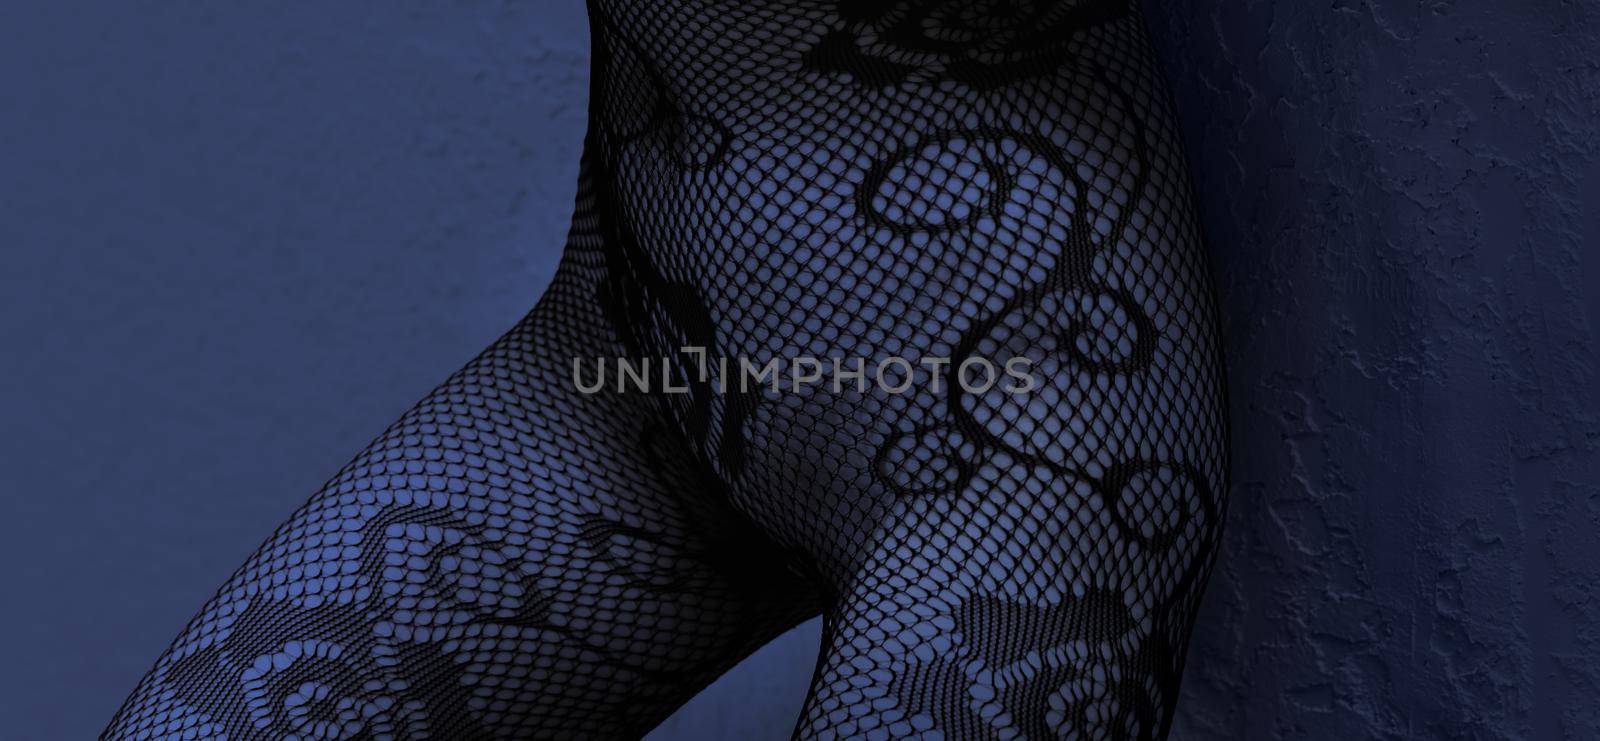 Seductive naked woman in fishnet tights. Young woman posing on white background in the sexy  clothes. Slim sexy female figure. Girl in lingerie and mesh tights. Body parts